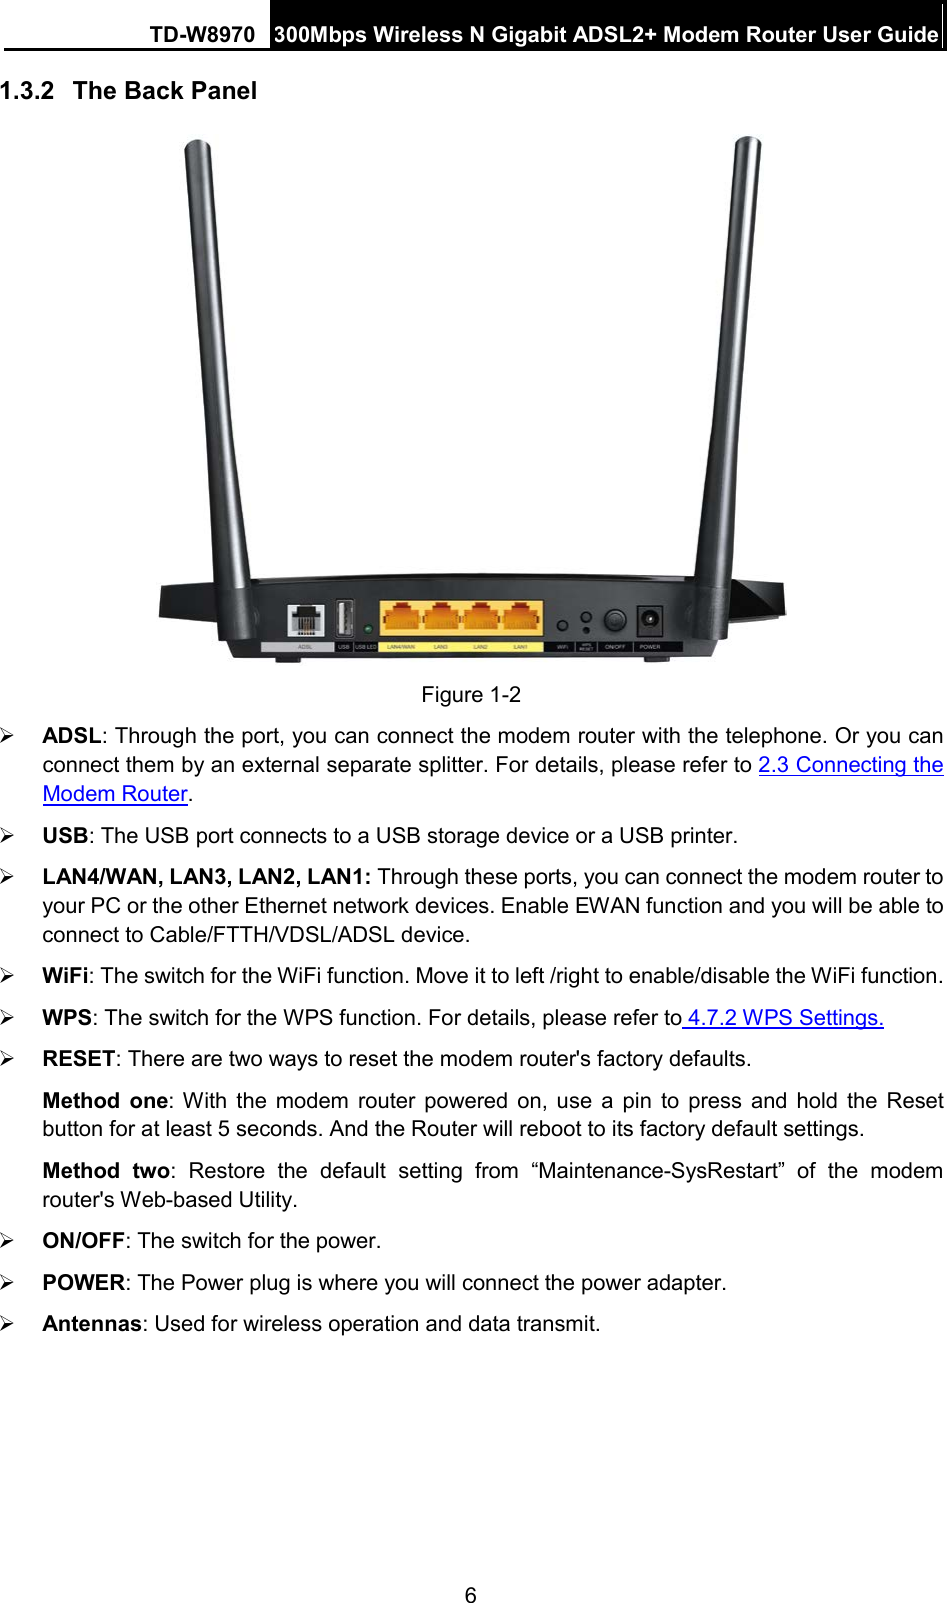 TD-W8970 300Mbps Wireless N Gigabit ADSL2+ Modem Router User Guide  1.3.2 The Back Panel  Figure 1-2  ADSL: Through the port, you can connect the modem router with the telephone. Or you can connect them by an external separate splitter. For details, please refer to 2.3 Connecting the Modem Router.    USB: The USB port connects to a USB storage device or a USB printer.  LAN4/WAN, LAN3, LAN2, LAN1: Through these ports, you can connect the modem router to your PC or the other Ethernet network devices. Enable EWAN function and you will be able to connect to Cable/FTTH/VDSL/ADSL device.  WiFi: The switch for the WiFi function. Move it to left /right to enable/disable the WiFi function.  WPS: The switch for the WPS function. For details, please refer to 4.7.2 WPS Settings.  RESET: There are two ways to reset the modem router&apos;s factory defaults.   Method one: With the modem router powered on, use a pin to press and hold the Reset button for at least 5 seconds. And the Router will reboot to its factory default settings. Method two: Restore the default setting from “Maintenance-SysRestart” of the modem router&apos;s Web-based Utility.  ON/OFF: The switch for the power.  POWER: The Power plug is where you will connect the power adapter.  Antennas: Used for wireless operation and data transmit. 6 